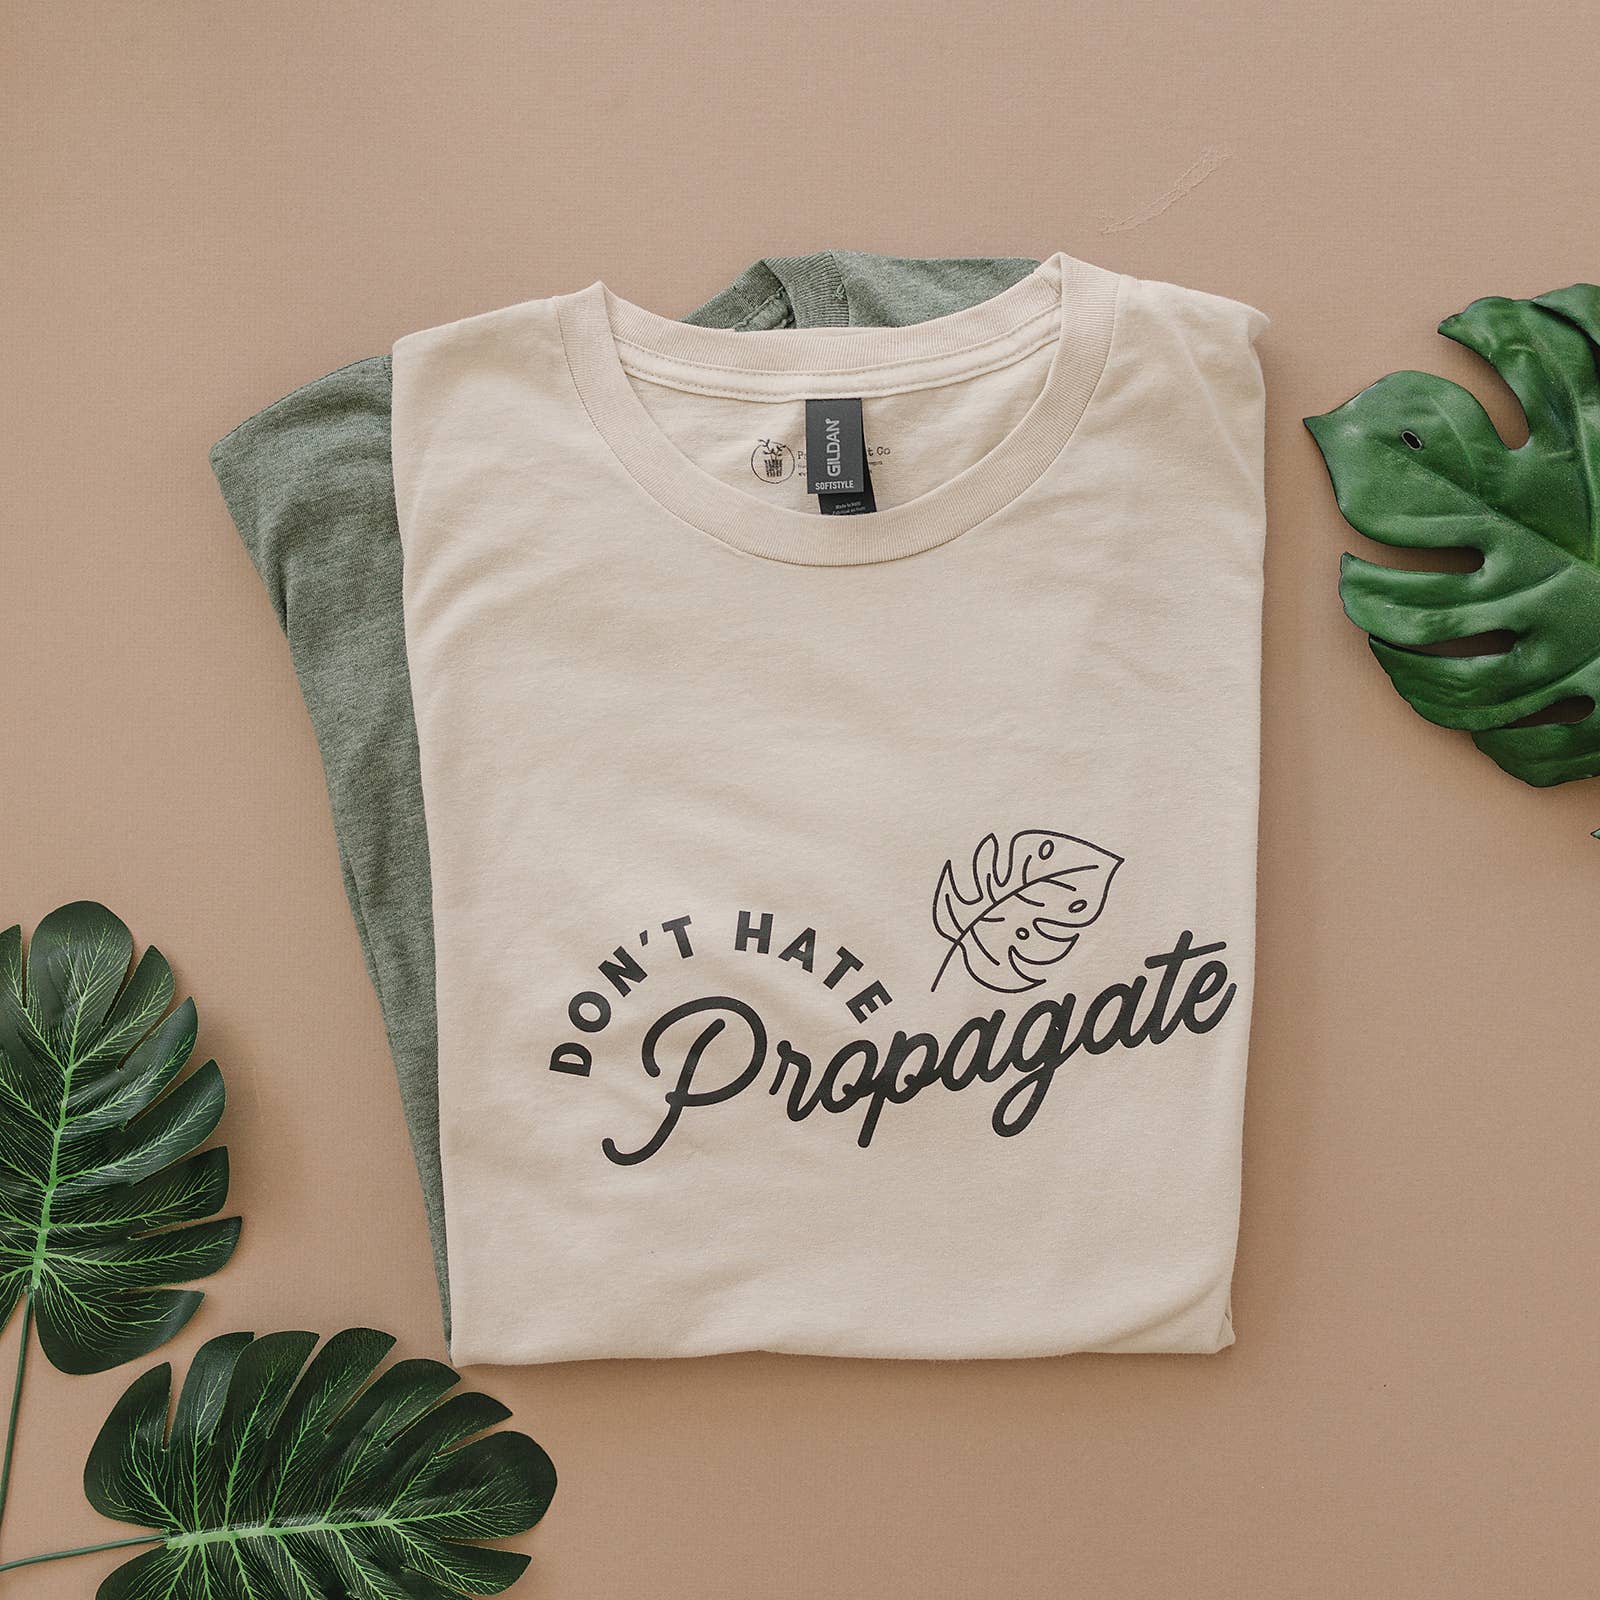 Packer Plant Co - "Don't Hate, Propagate" Plant Themed Graphic T-Shirt: XL / Heather Military Green